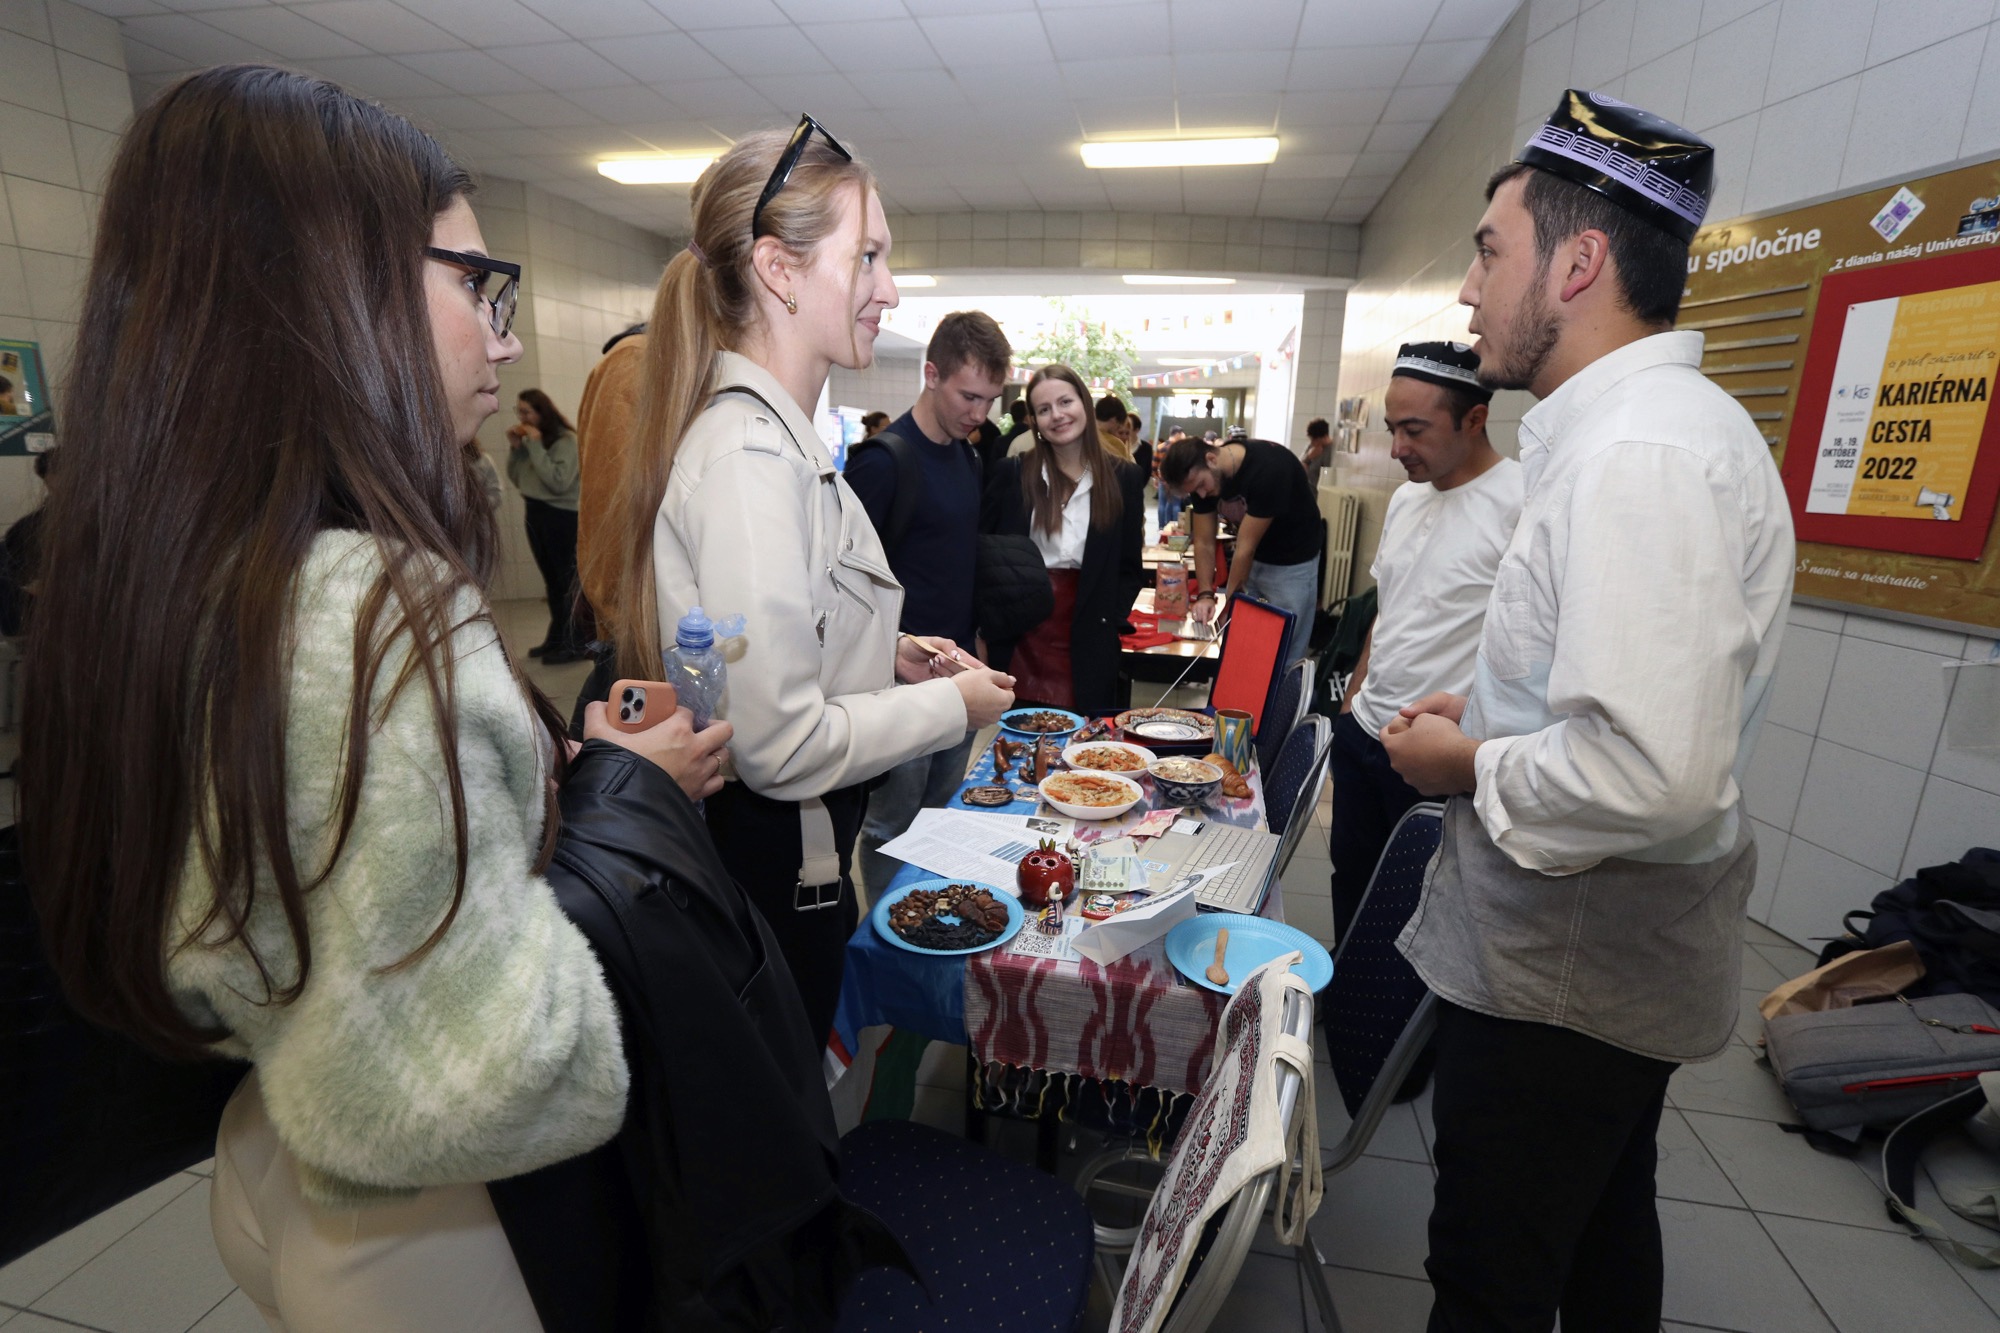 9th International Study Abroad Fair took place